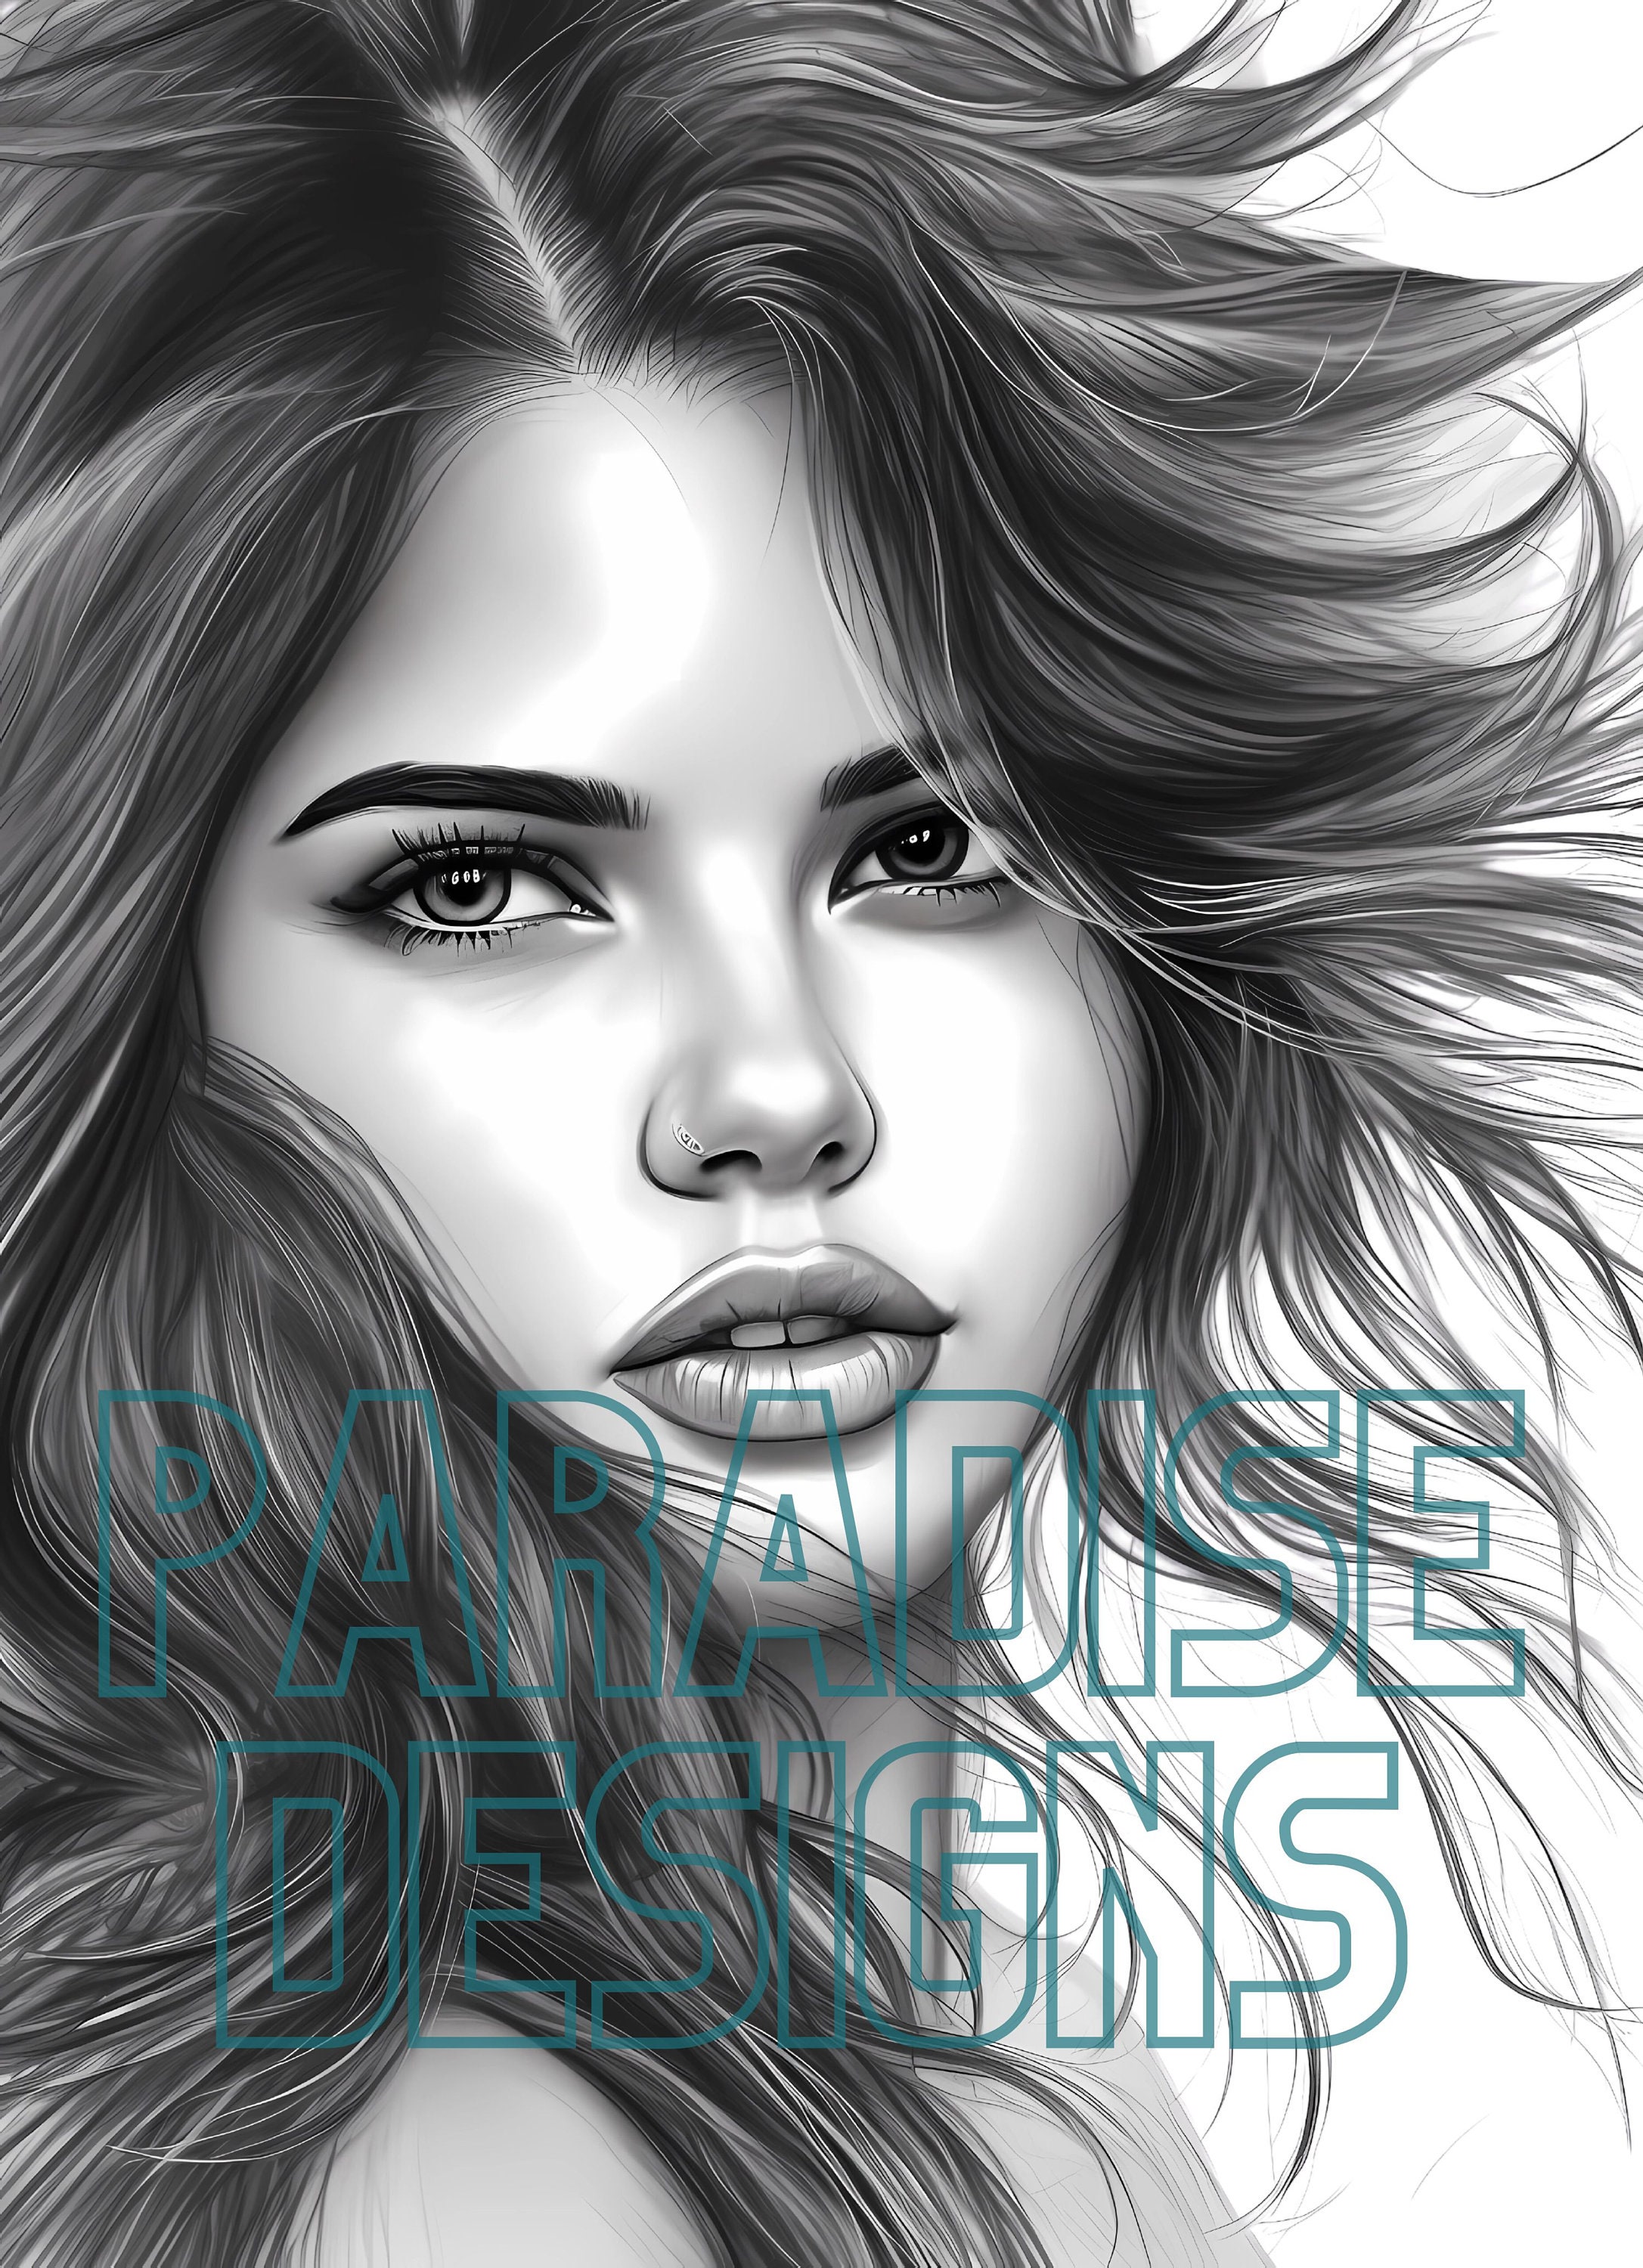 Selena gomez coloring page for adults and kids grayscale coloring page instant download digital download jpg instant download